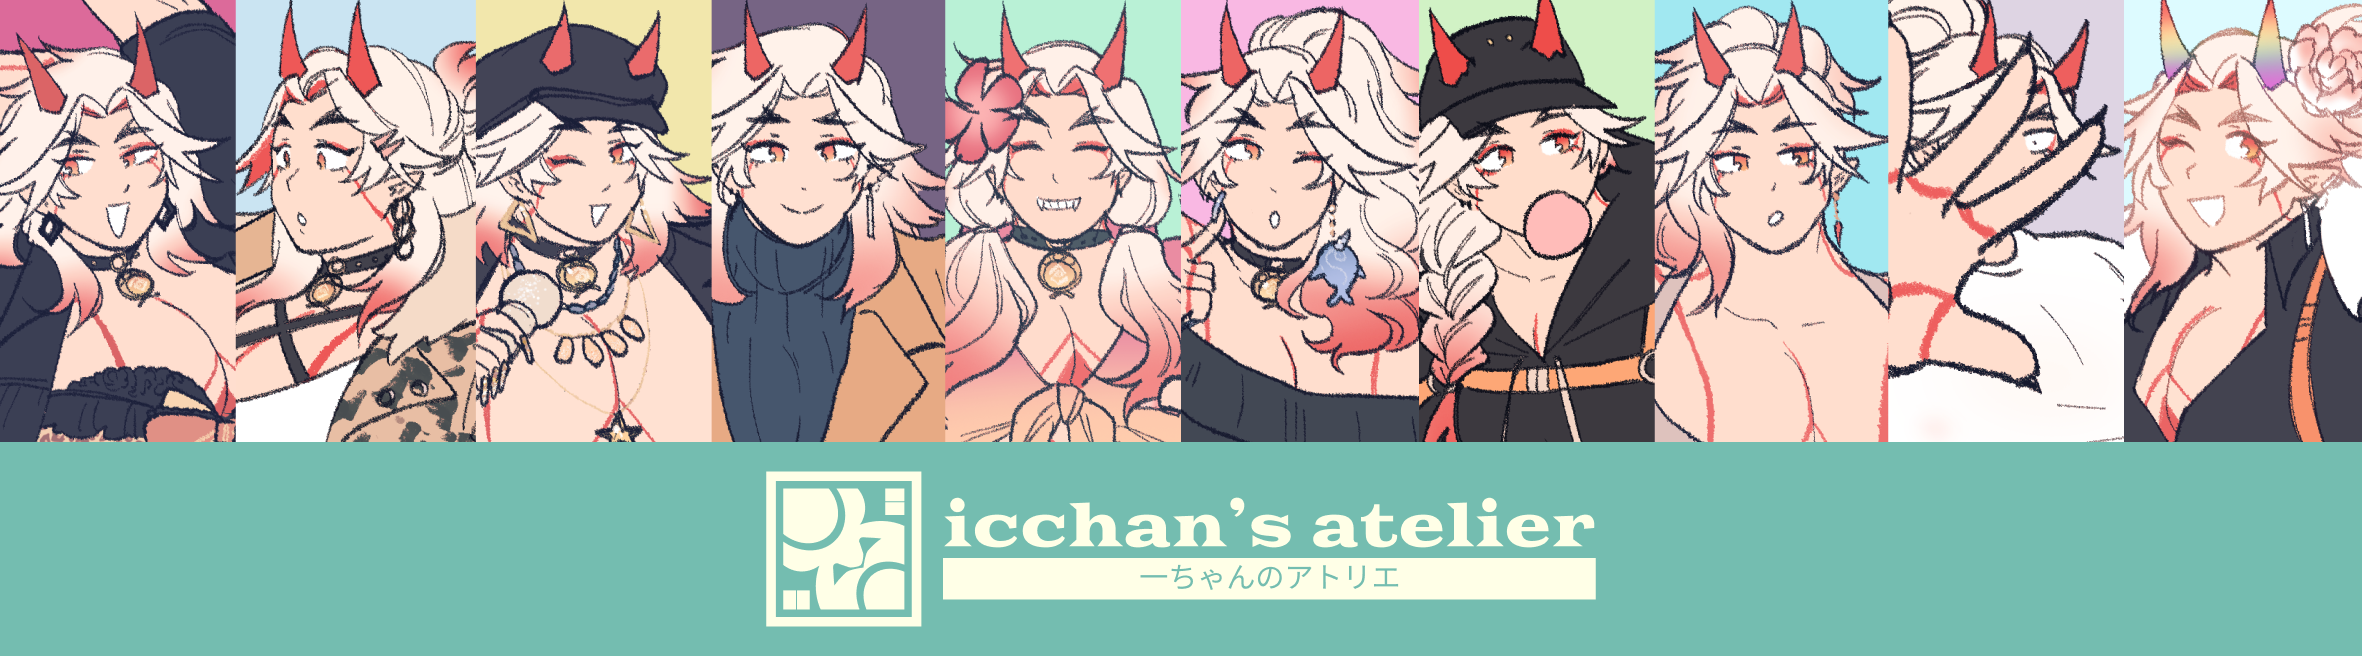 ICCHAN'S ATELIER - an unofficial itto fashion zine